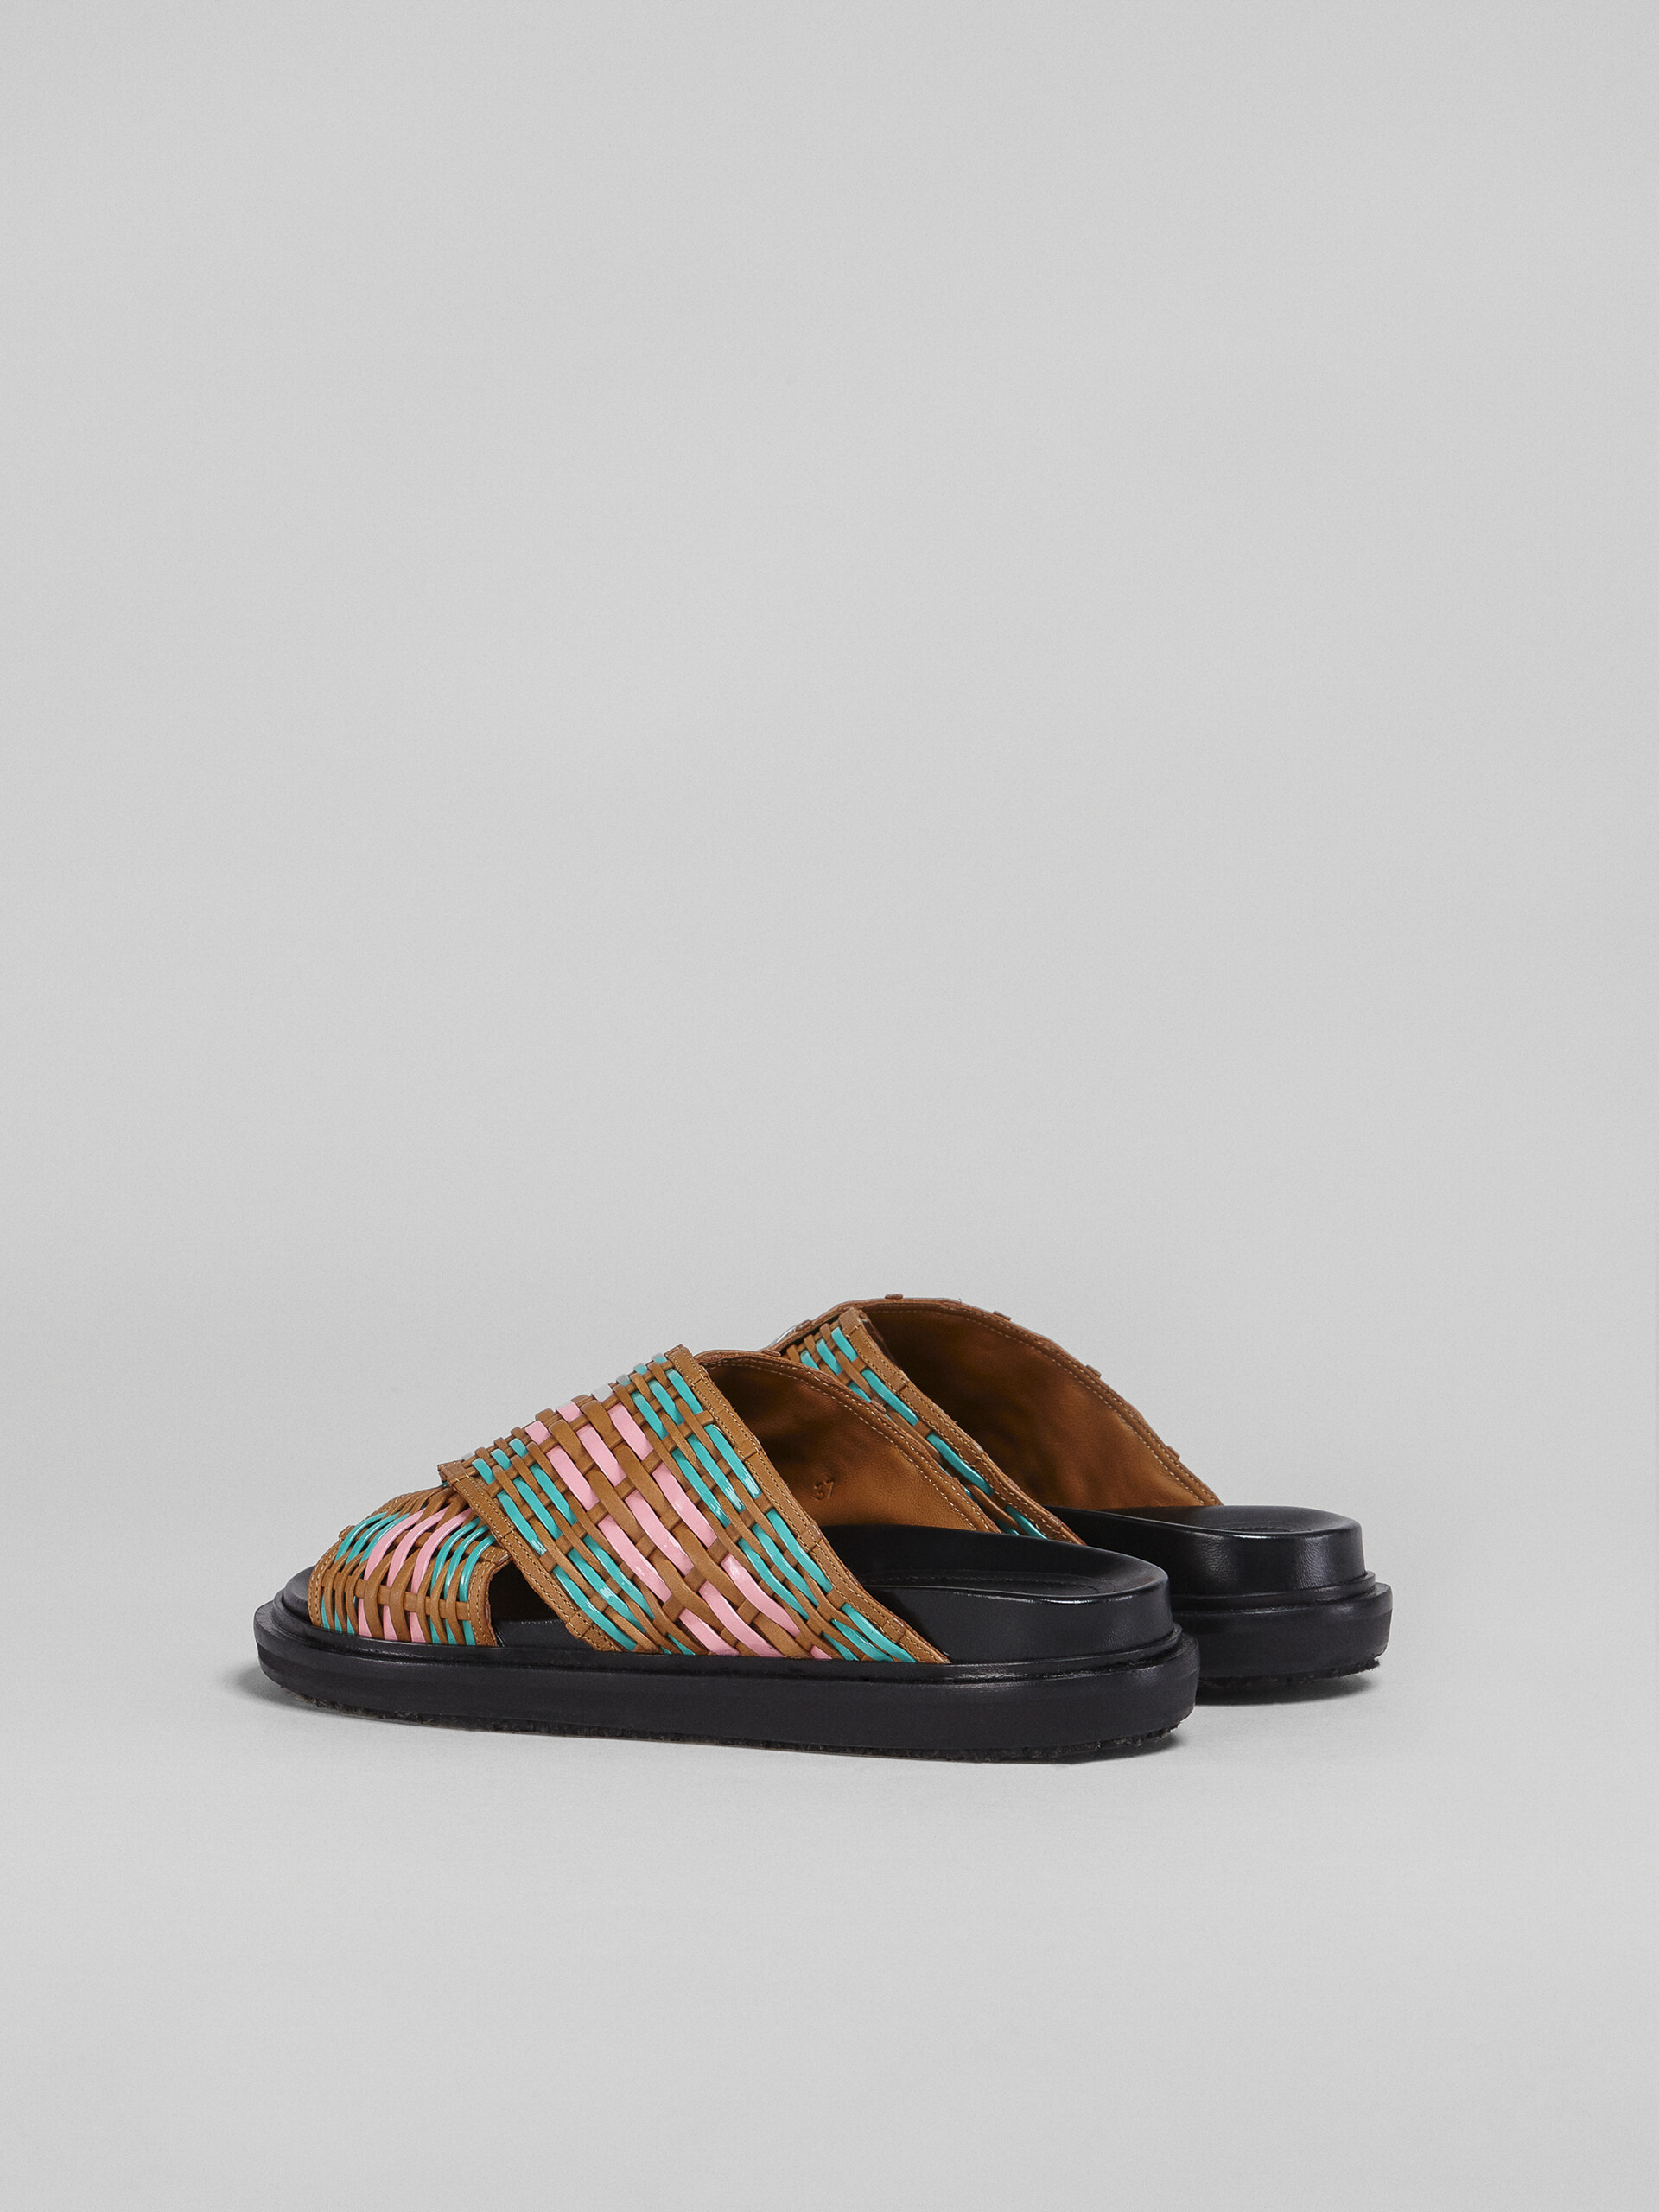 Woven leather Fussbett - Sandals - Image 3